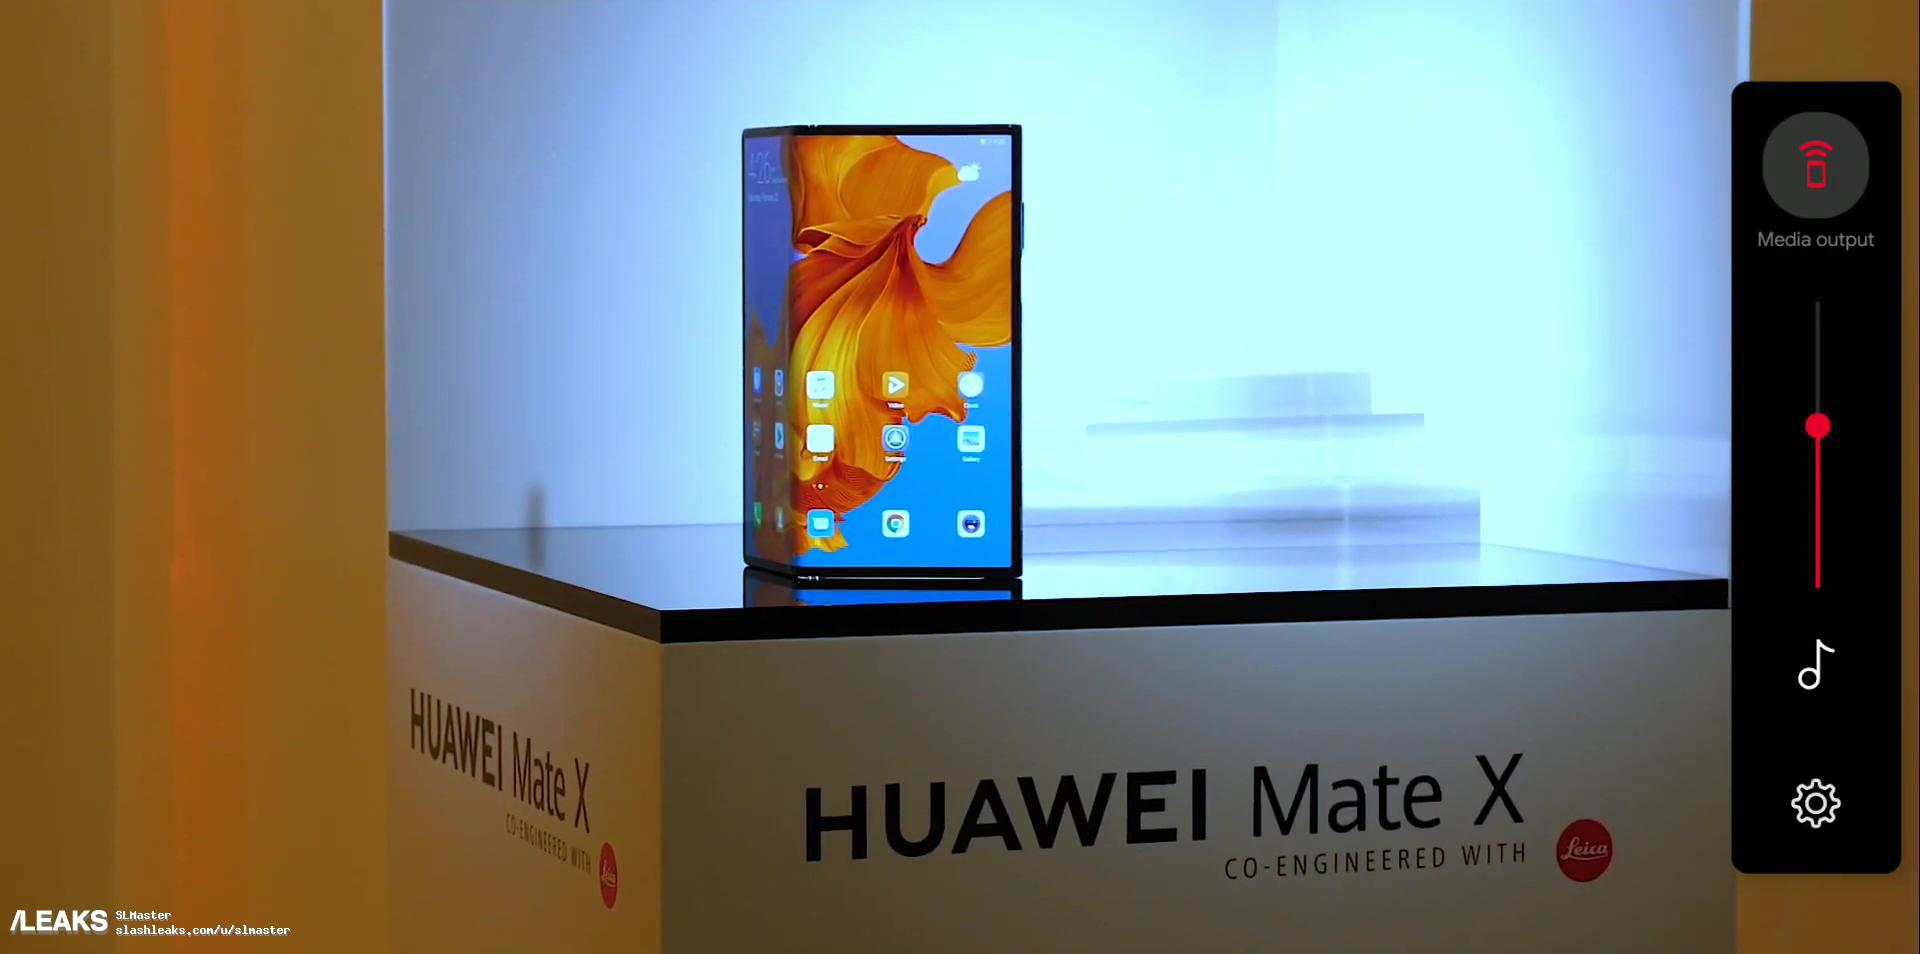 Here’s an Actual Photo of the Huawei Mate X